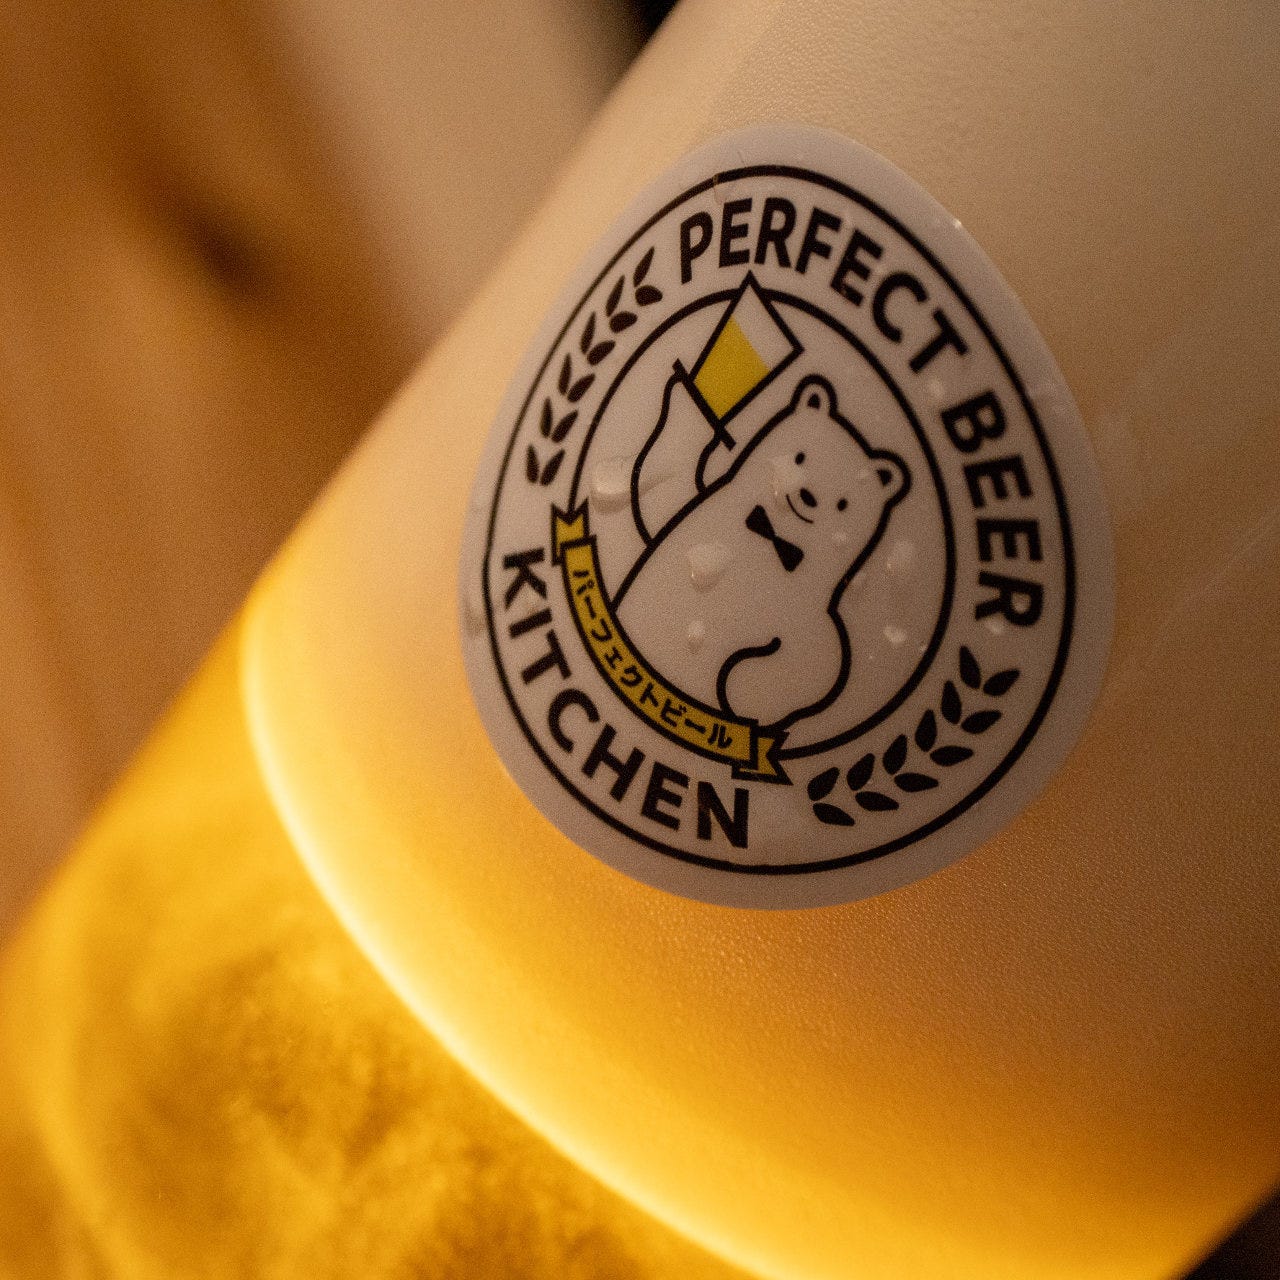 PERFECT BEER KITCHEN 四ツ谷